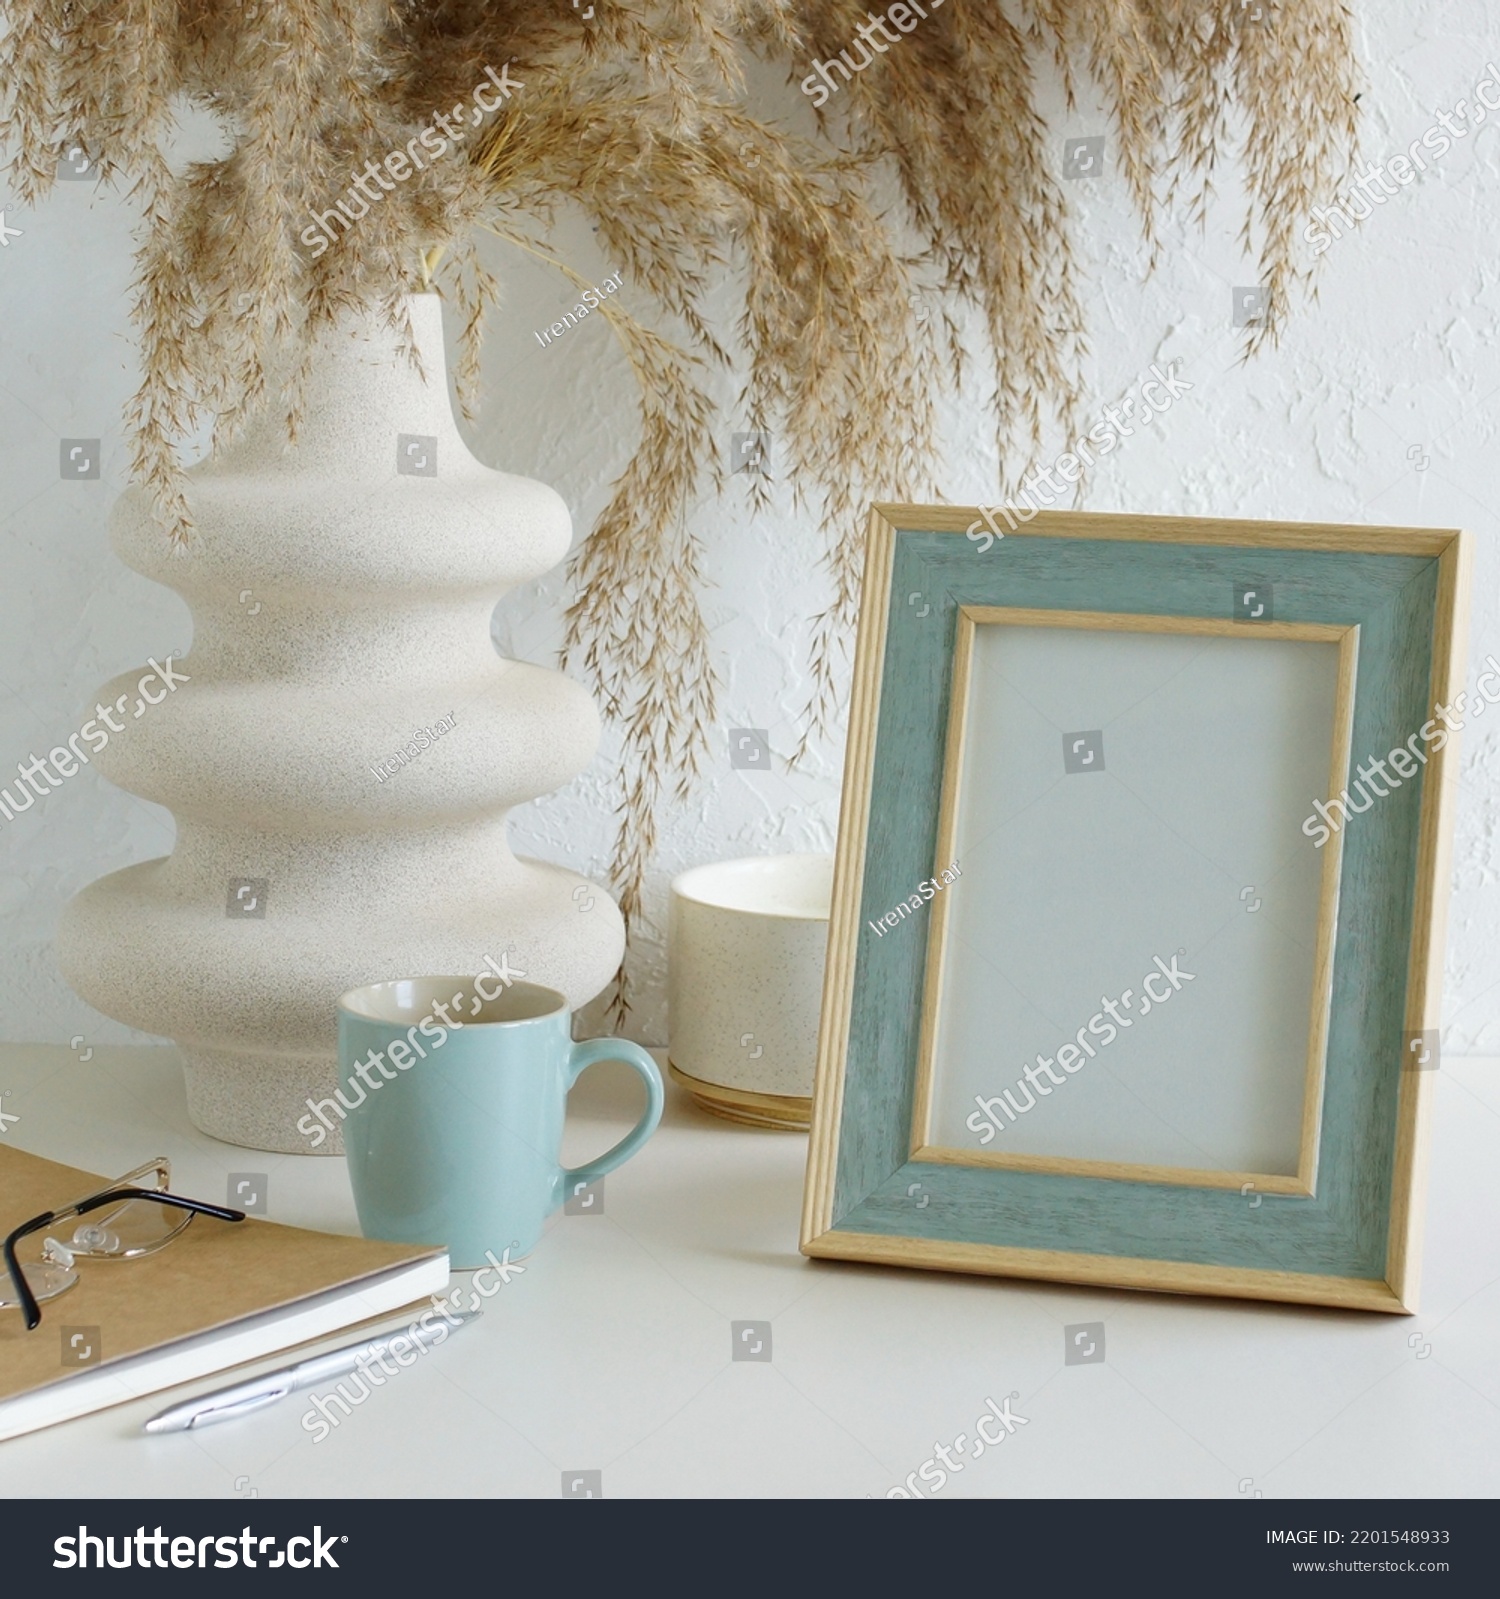 Modern home office workspace with photo frame mockup.  Aesthetic scandy hygge style.Cup coffee, photo frame,planner, vase with grass,aroma candle .Copy space.Neutral colors home design. #2201548933